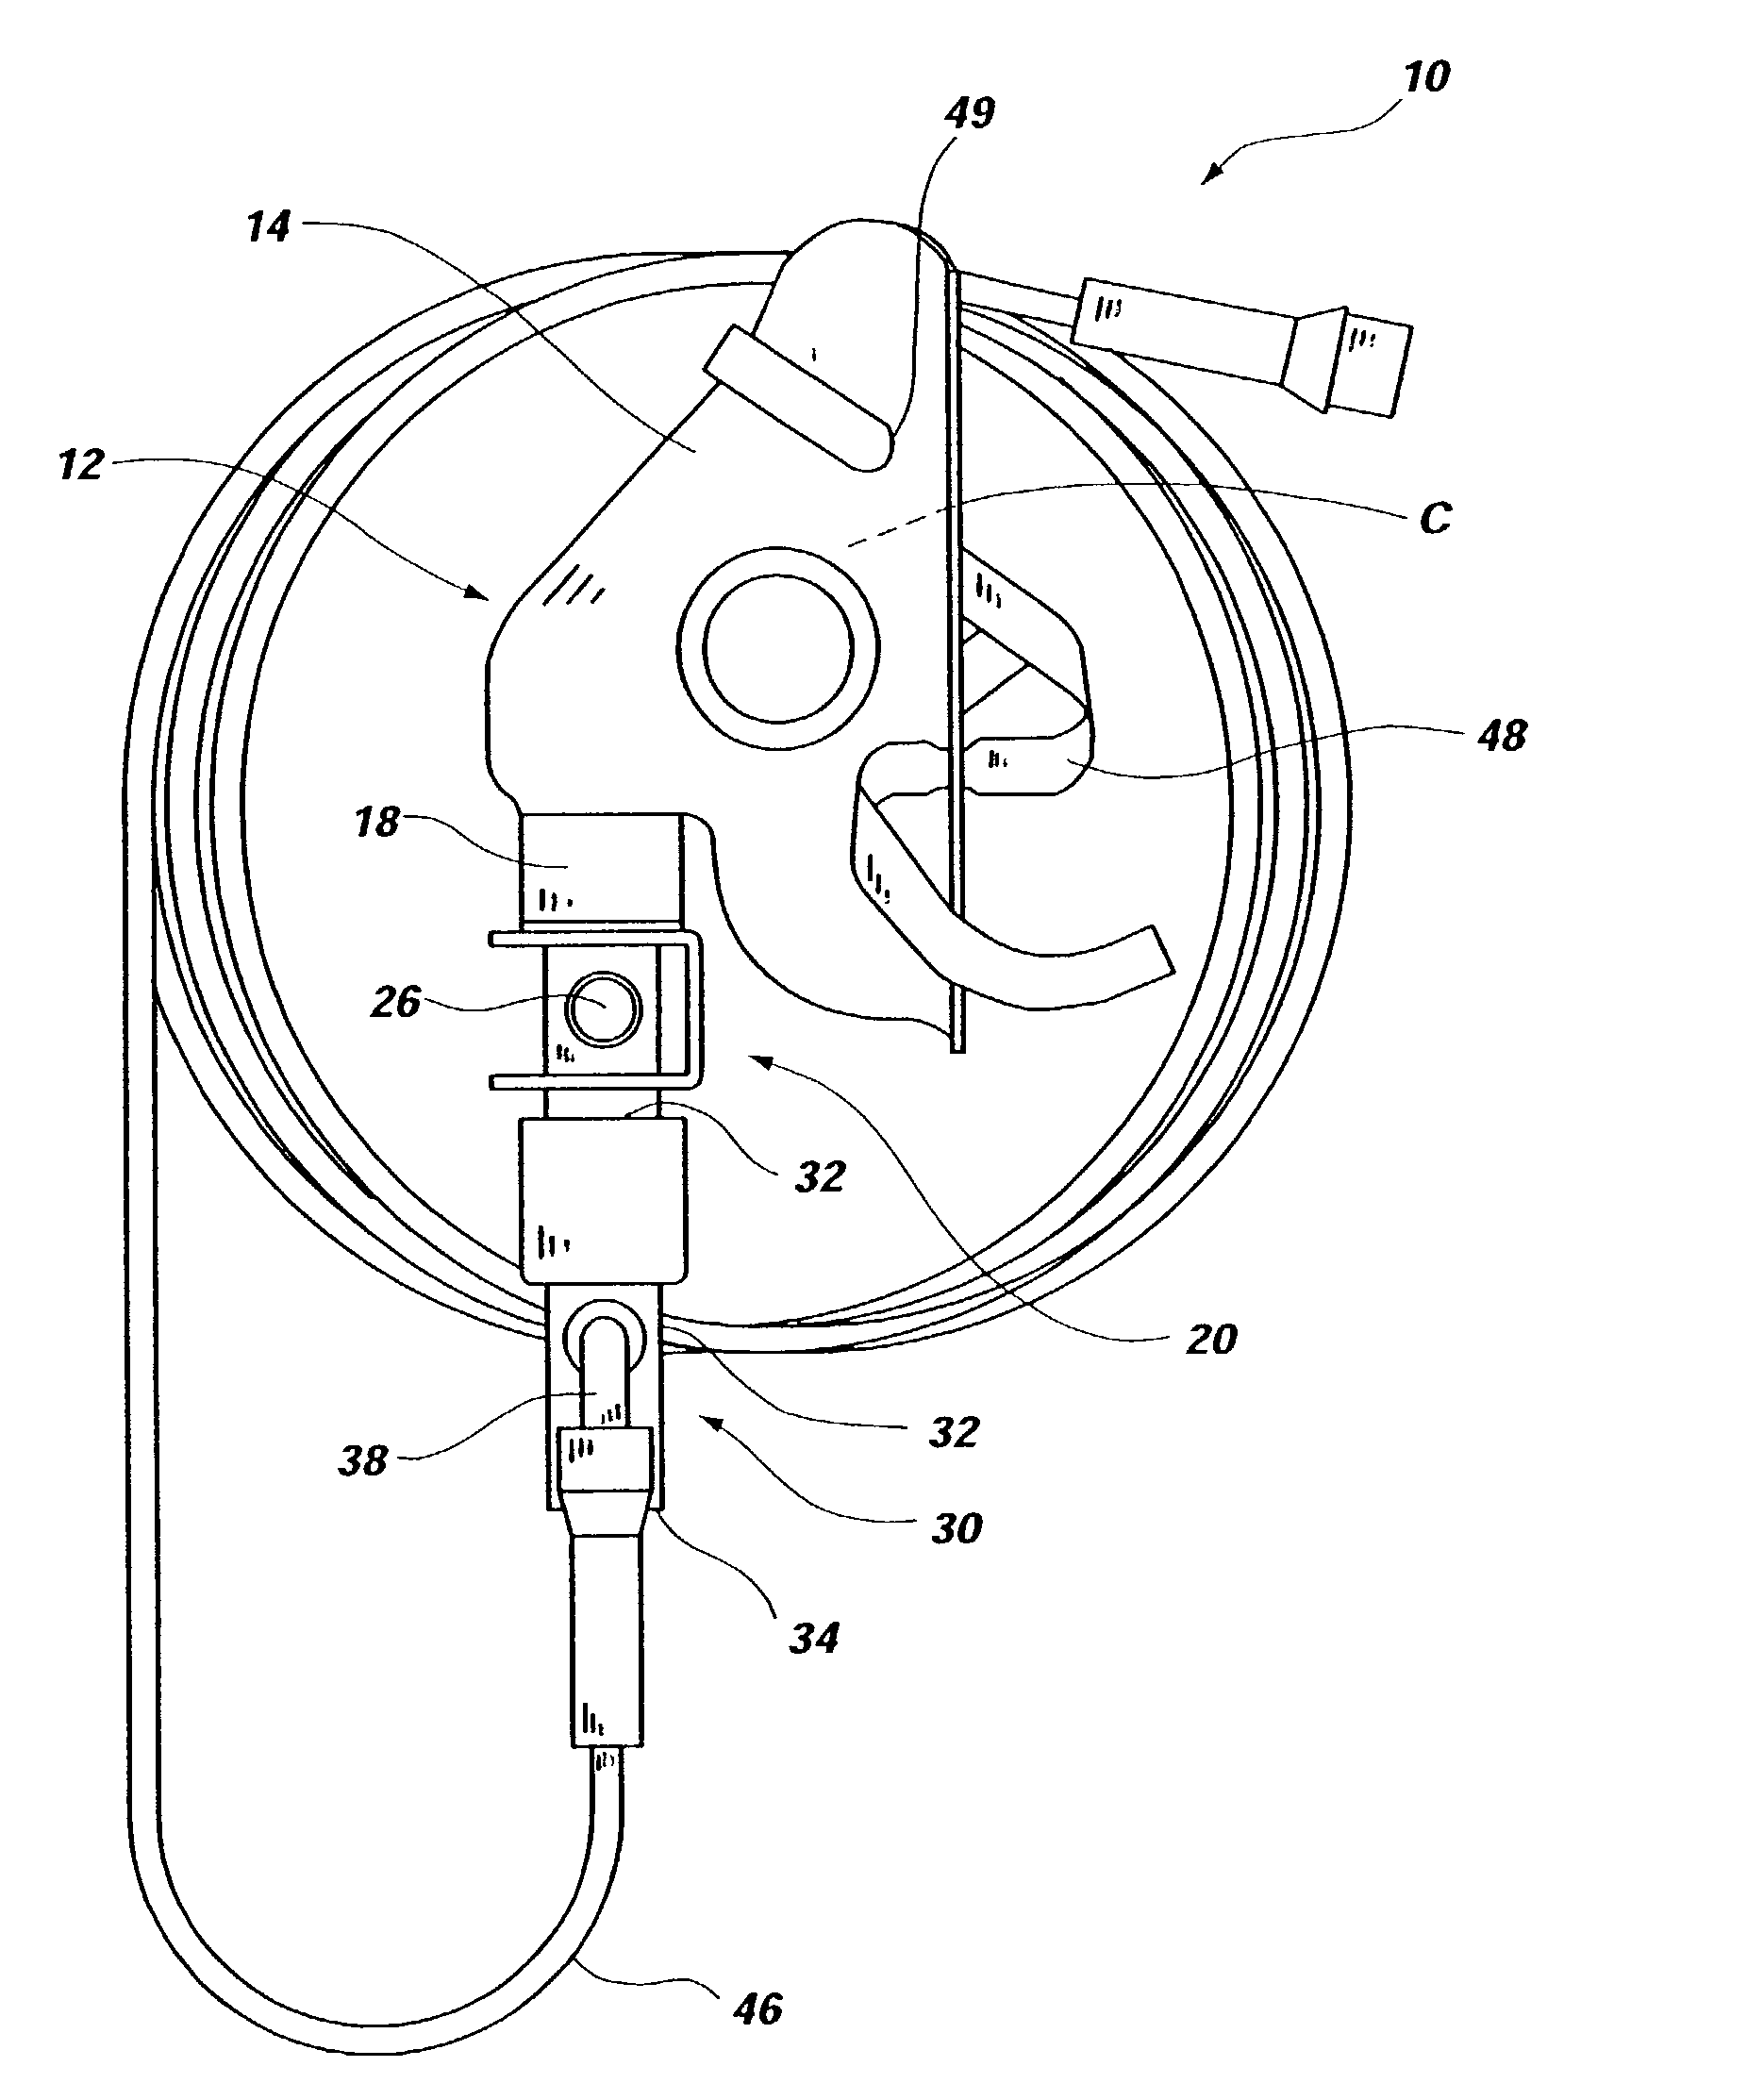 Face mask for gas monitoring during supplemental oxygen delivery